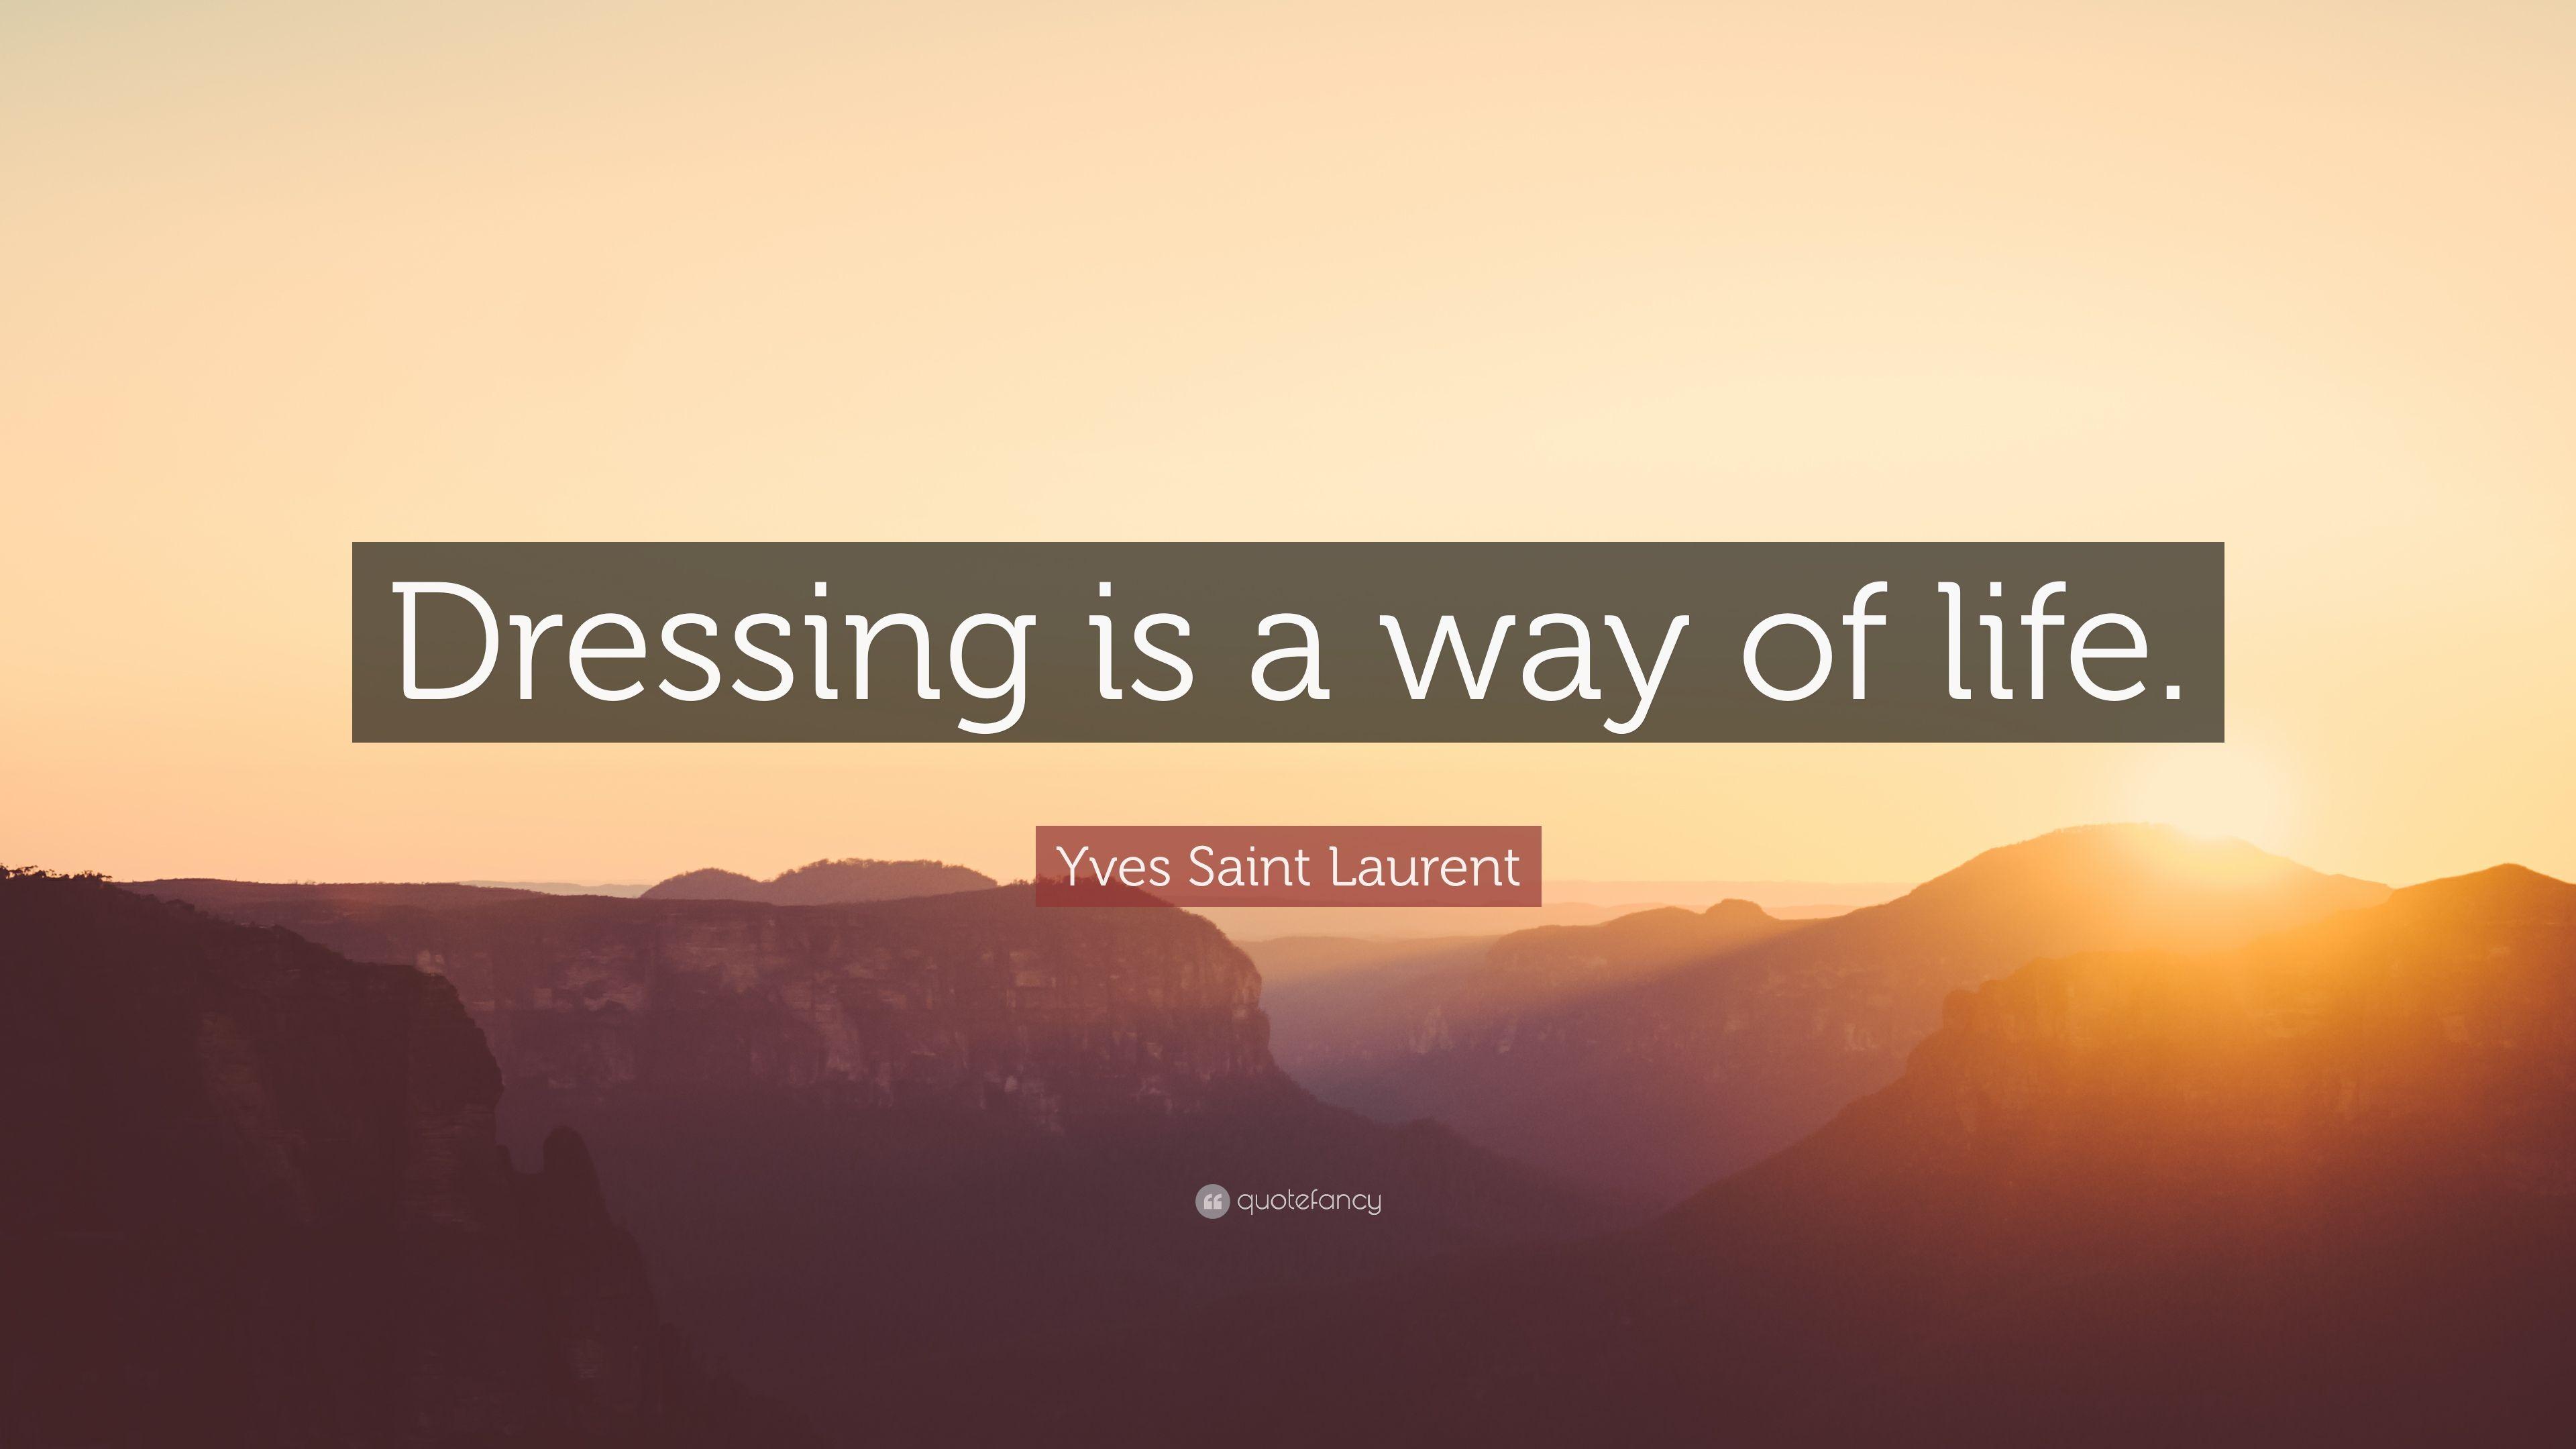 Yves Saint Laurent Quote: “Dressing is a way of life.” 12